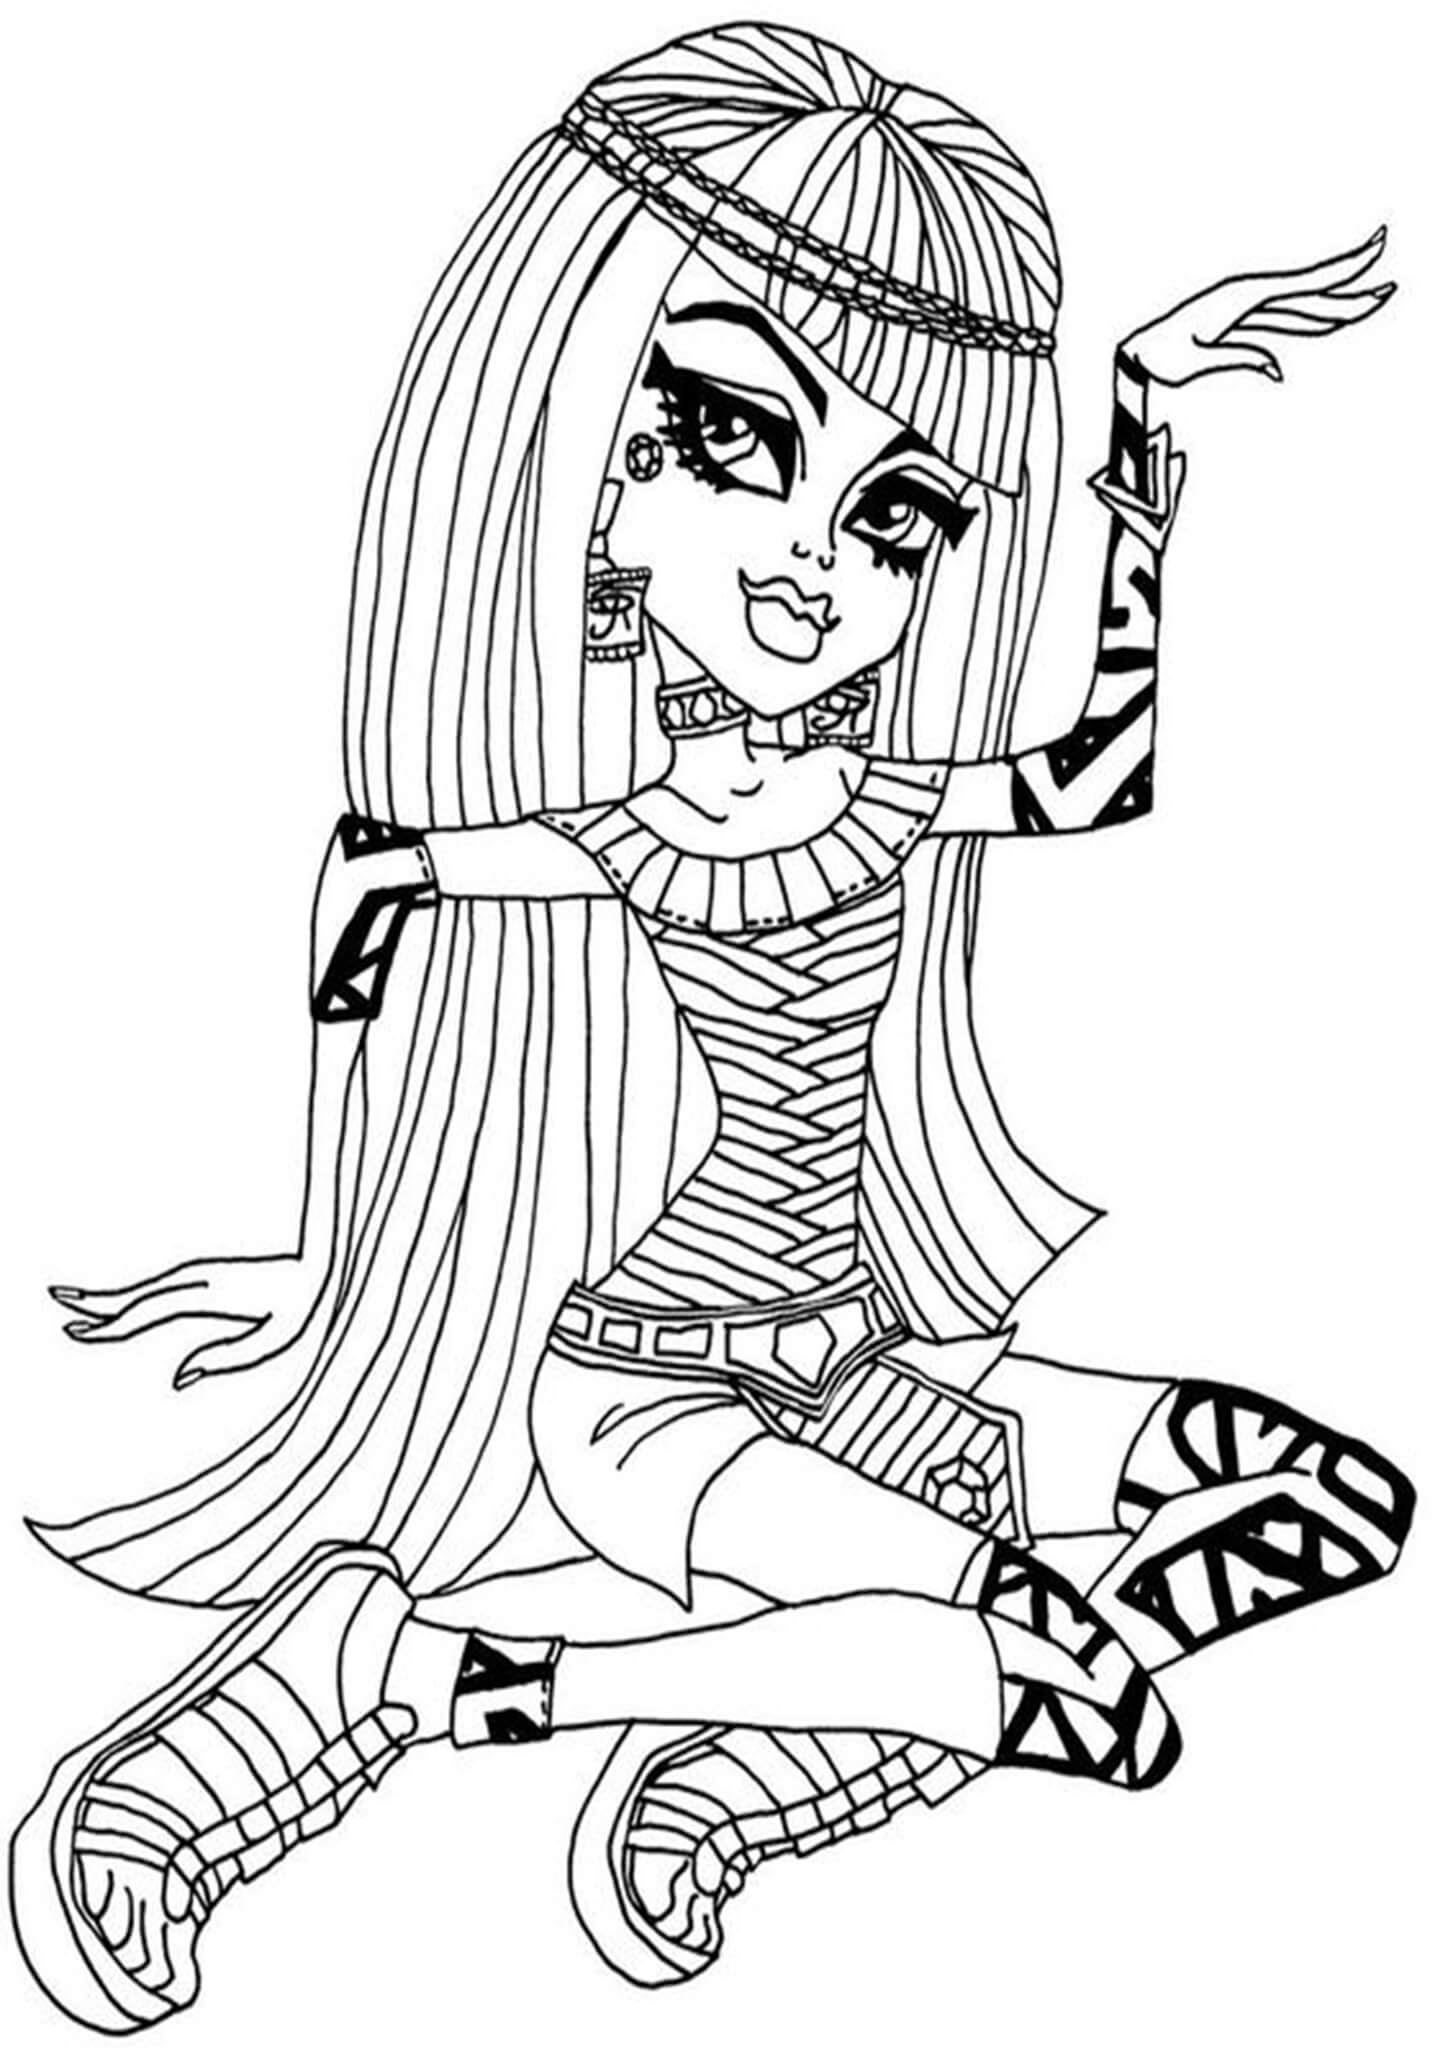 Free easy to print monster high coloring pages